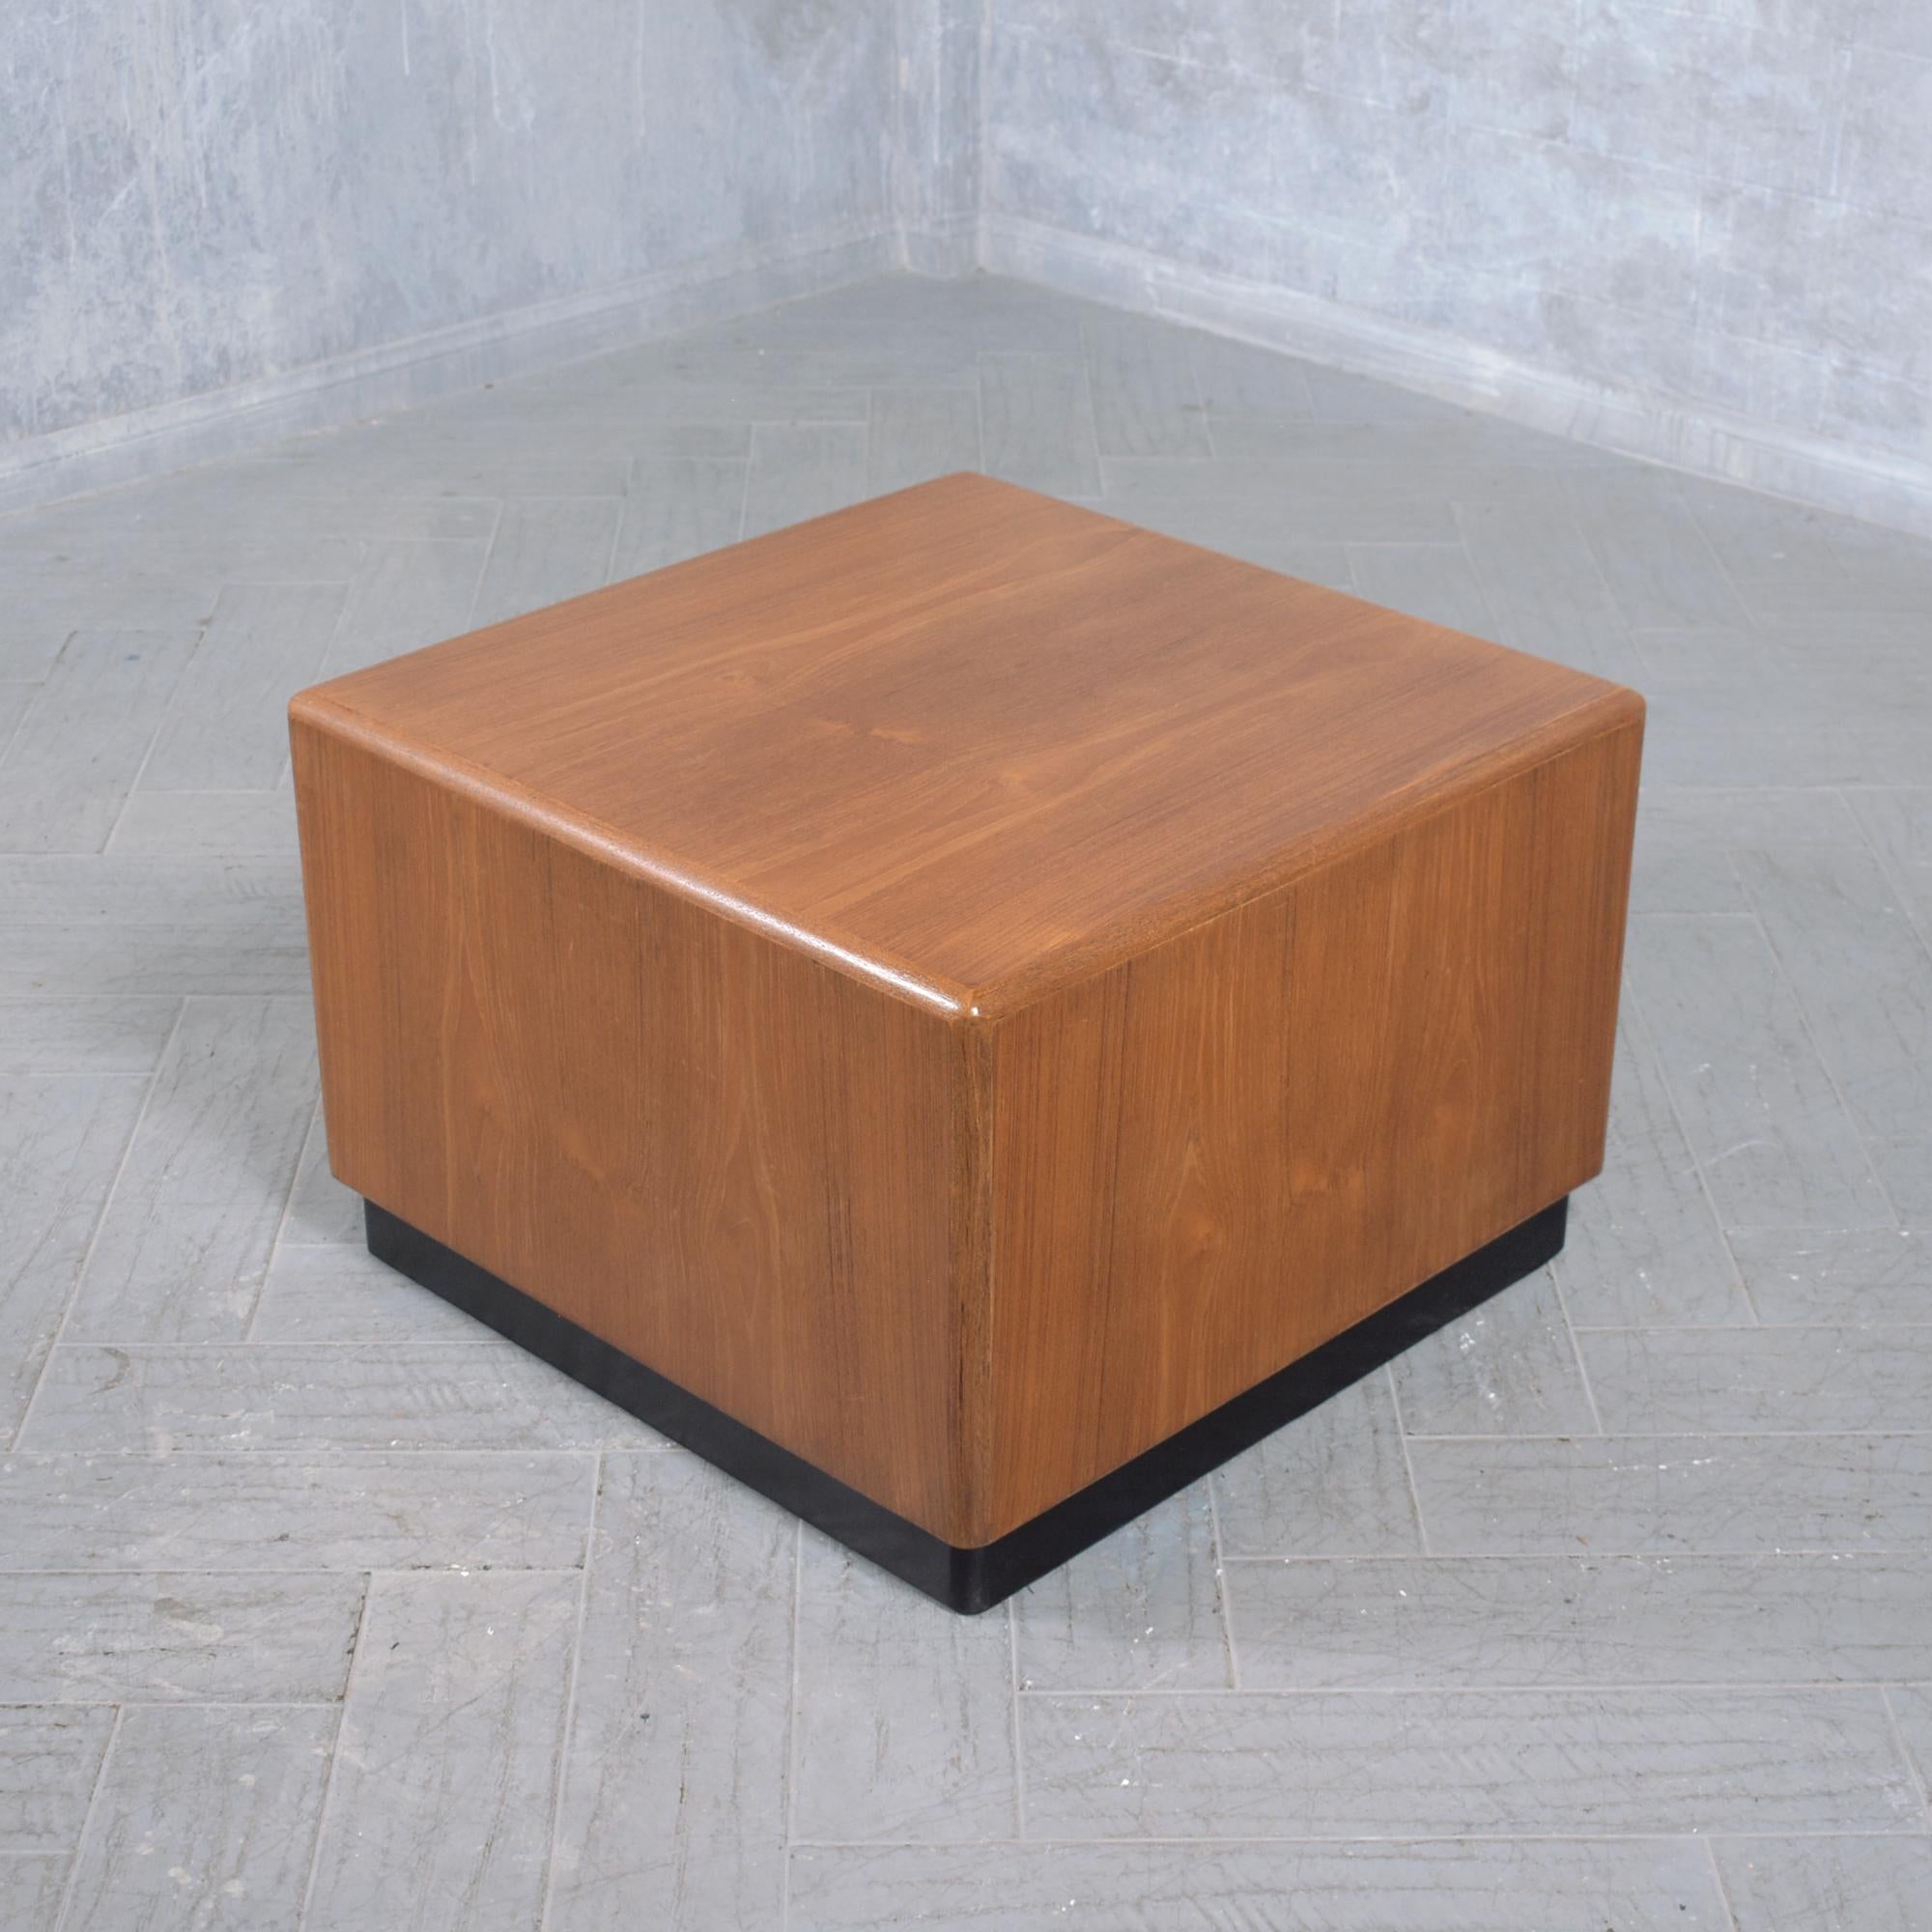 Stained Vintage 1960s Teak Wood Waterfall Side Table - Fully Restored and Sleek Design For Sale